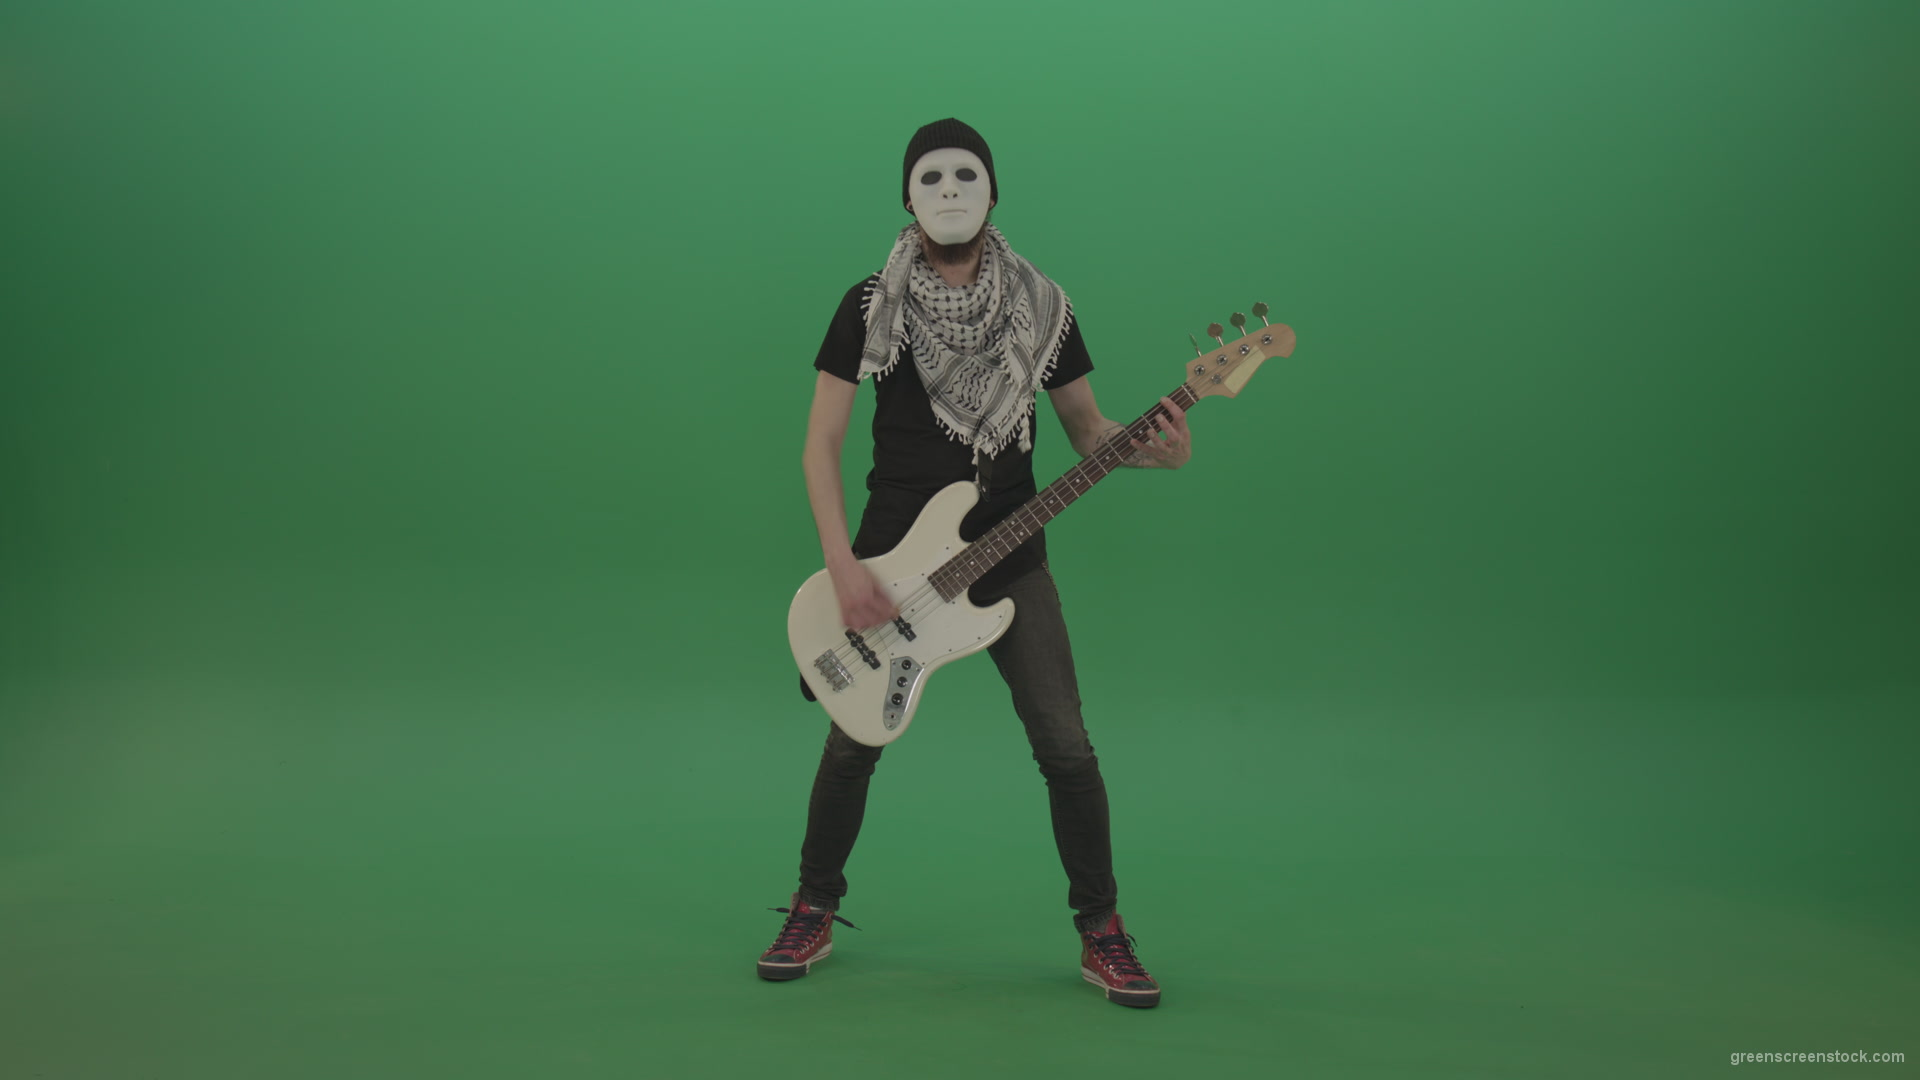 Bass-guitaris-in-full-size-play-white-guitar-in-white-mask-on-chromakey-green-screen_002 Green Screen Stock